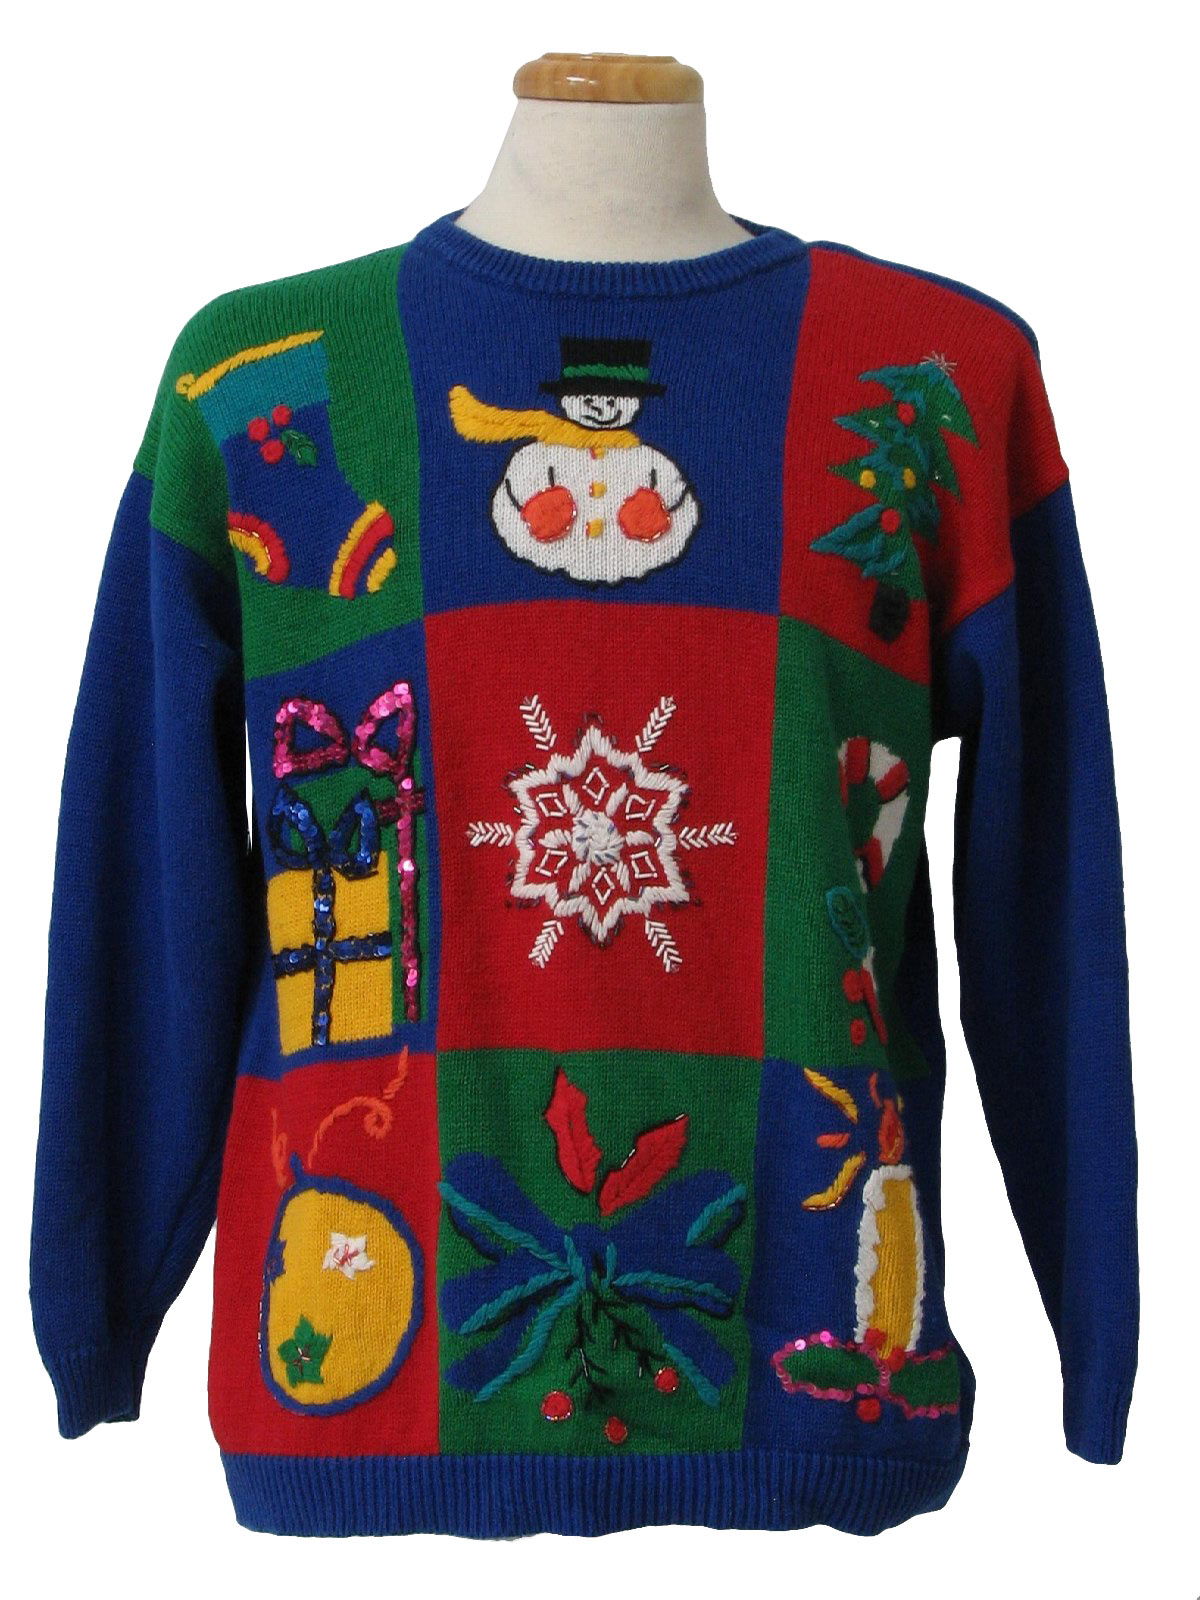 Ugly Christmas Sweater: -I.B. Diffusion- Unisex Blue, green, red and ...